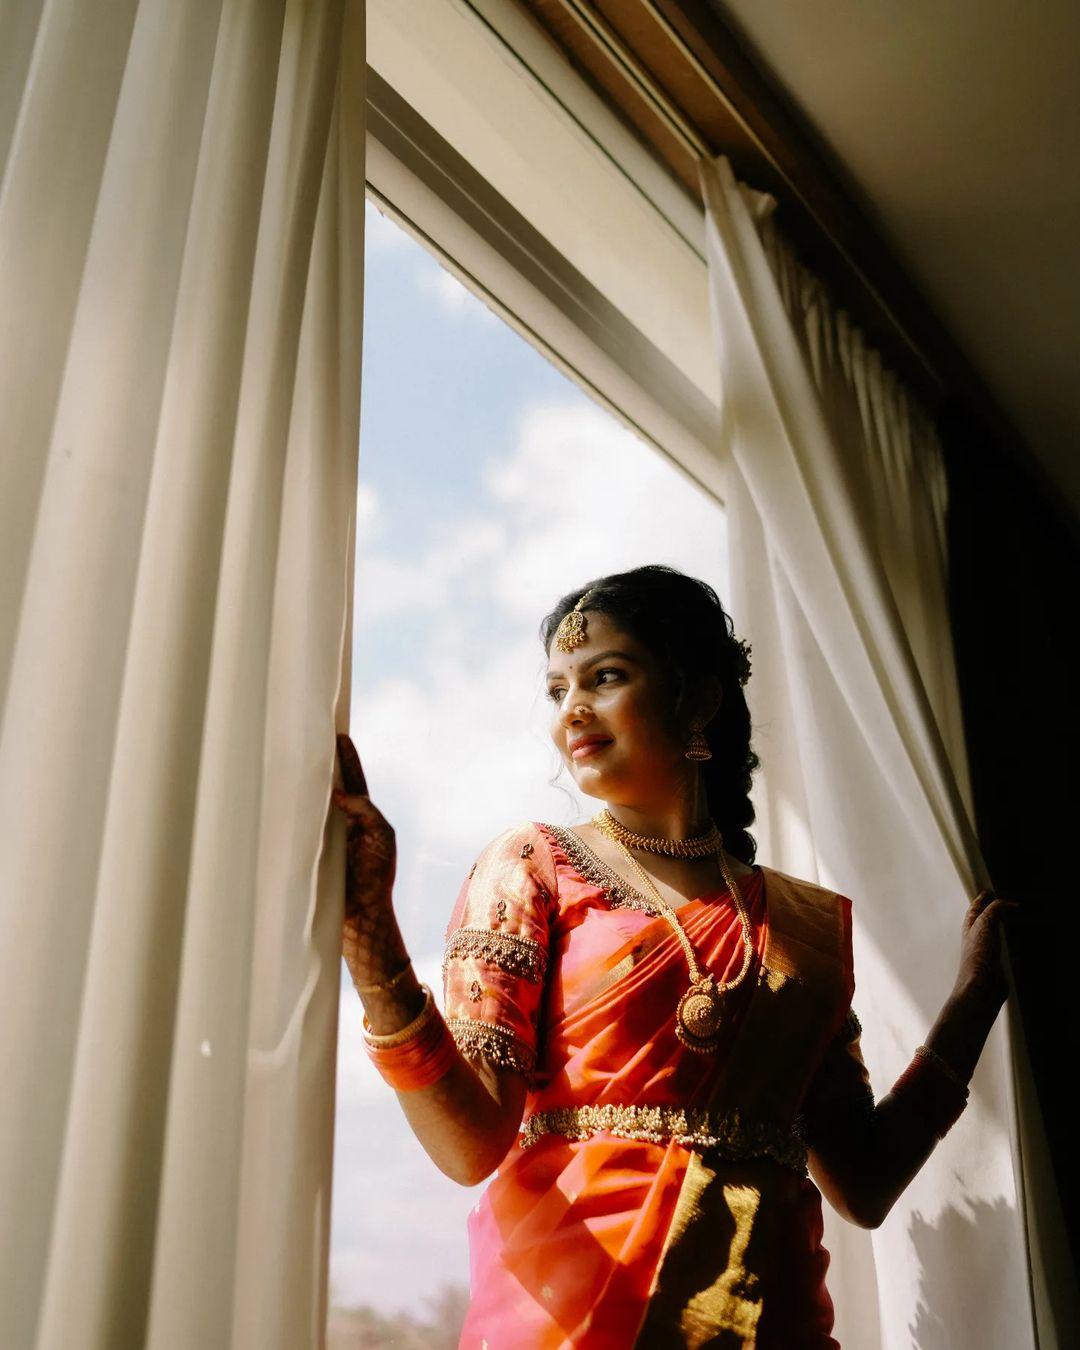 Traditional Indian Bridal Dress in Red and Gold